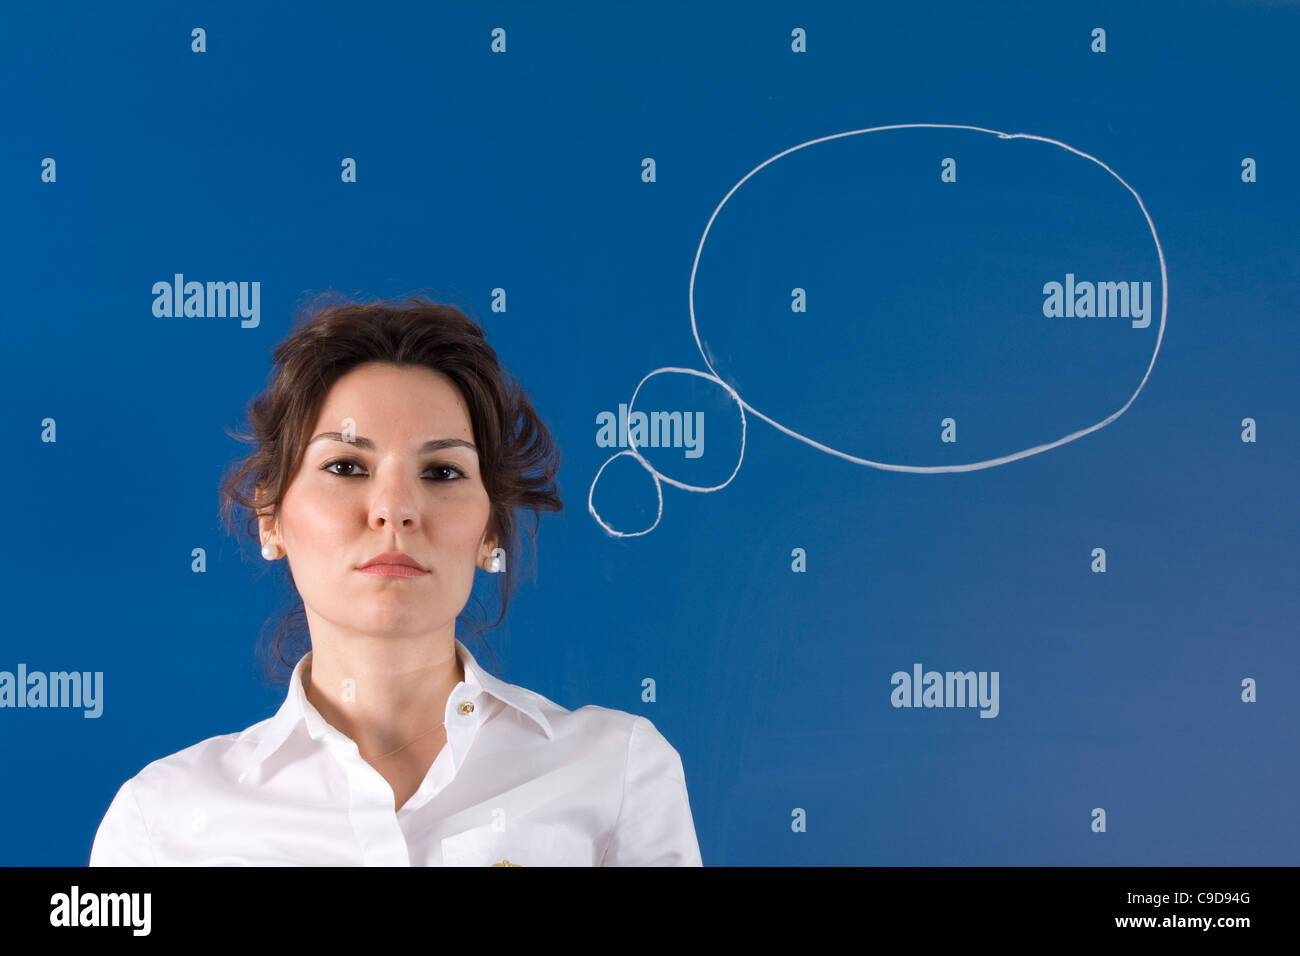 Image of young woman thinking on blue board Stock Photo